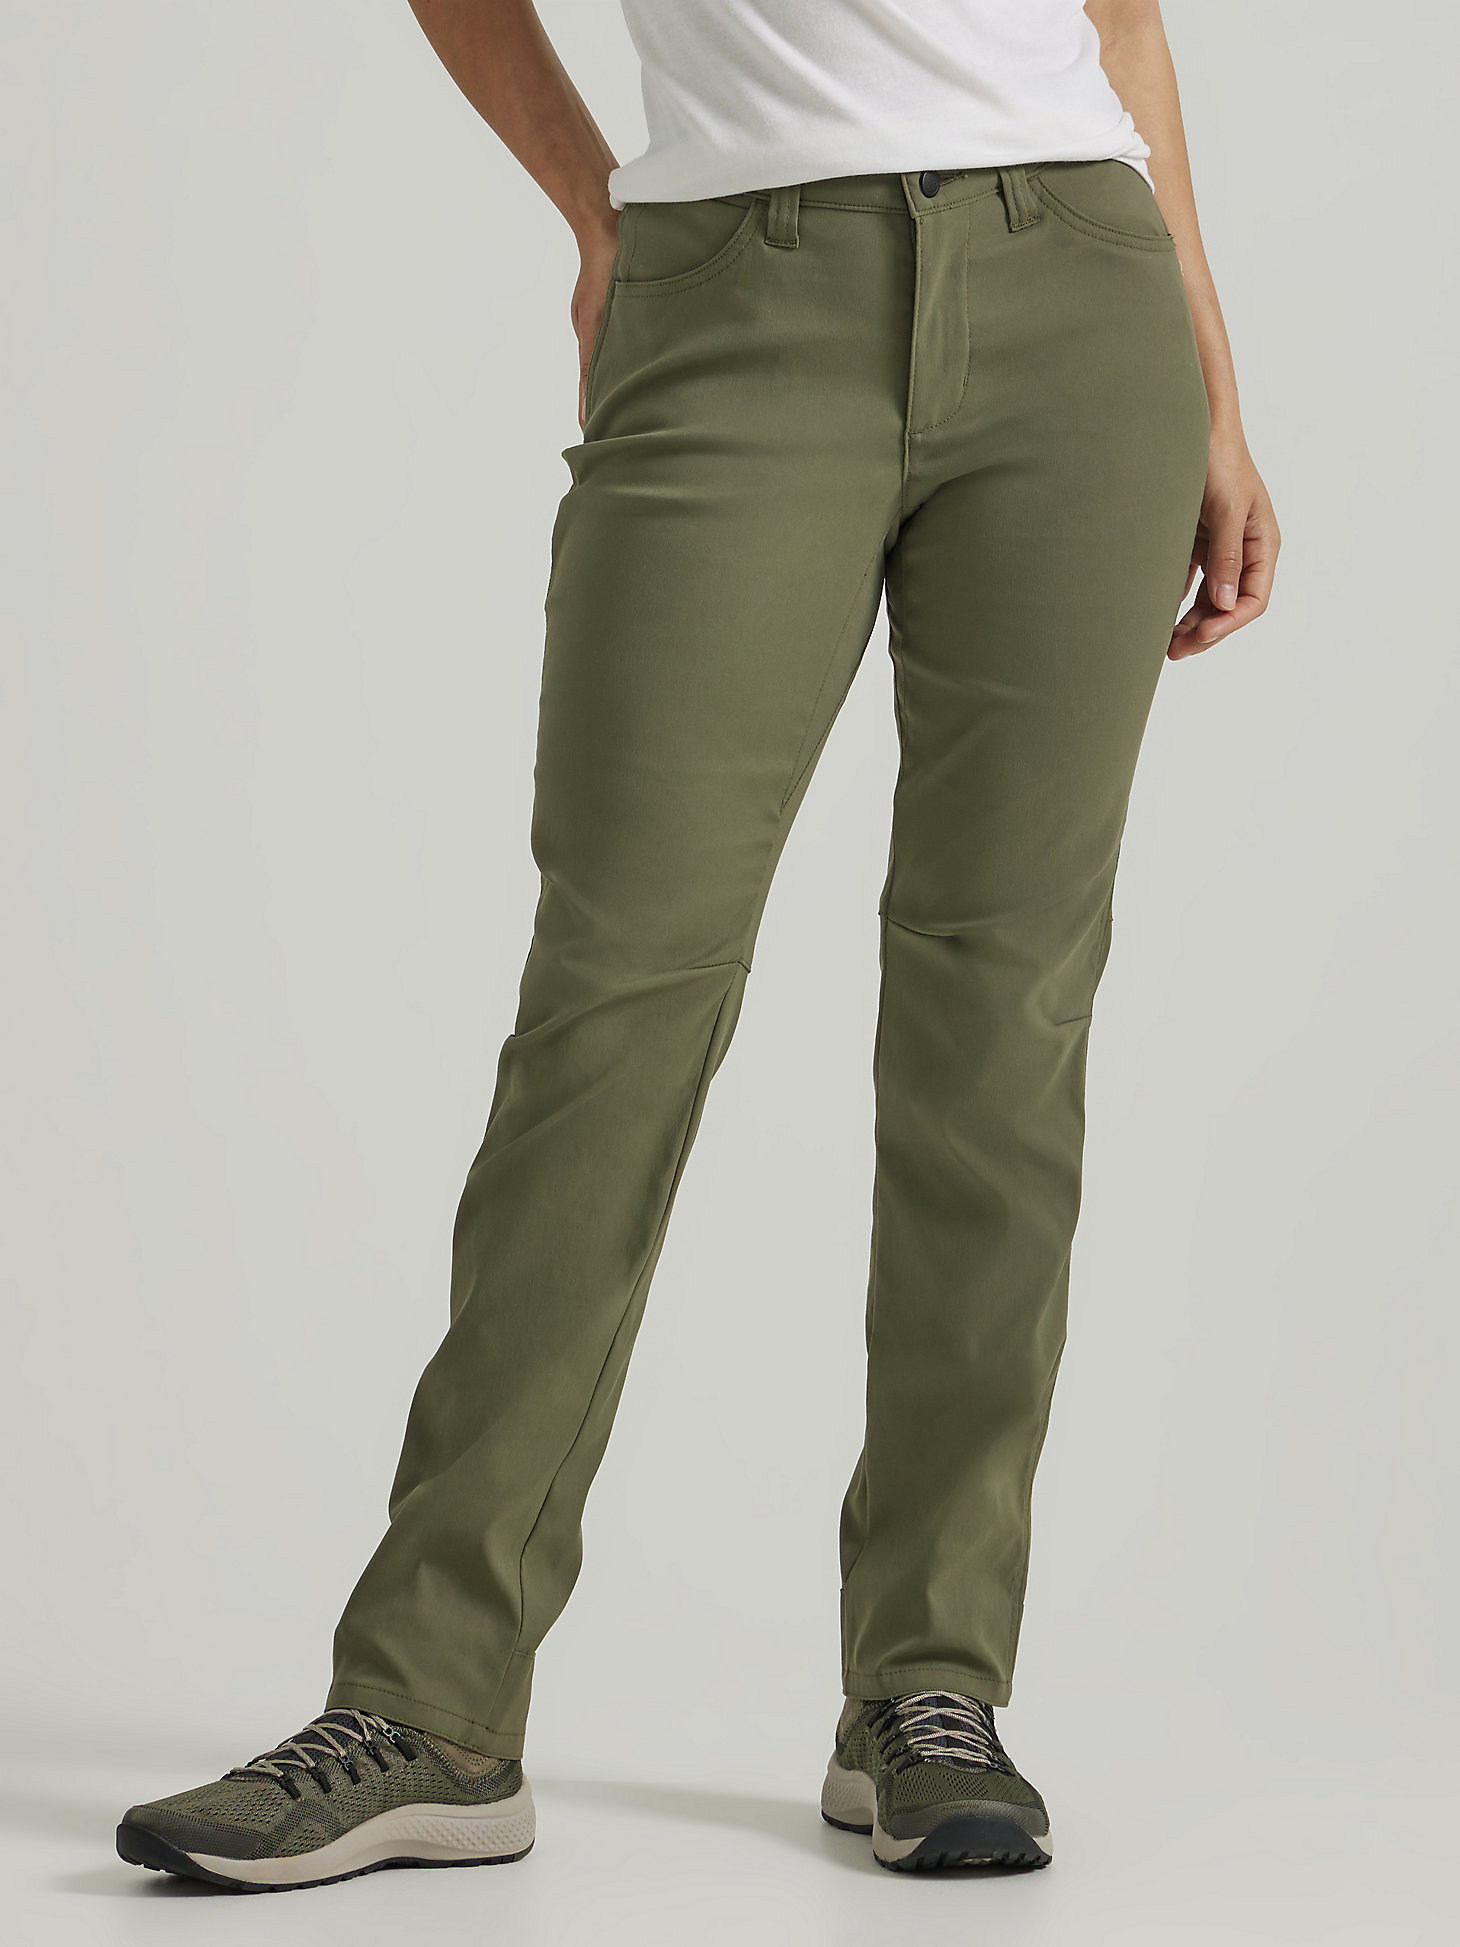 ATG by Wrangler™ Women's Slim Utility Pant in Dusty Olive alternative view 5